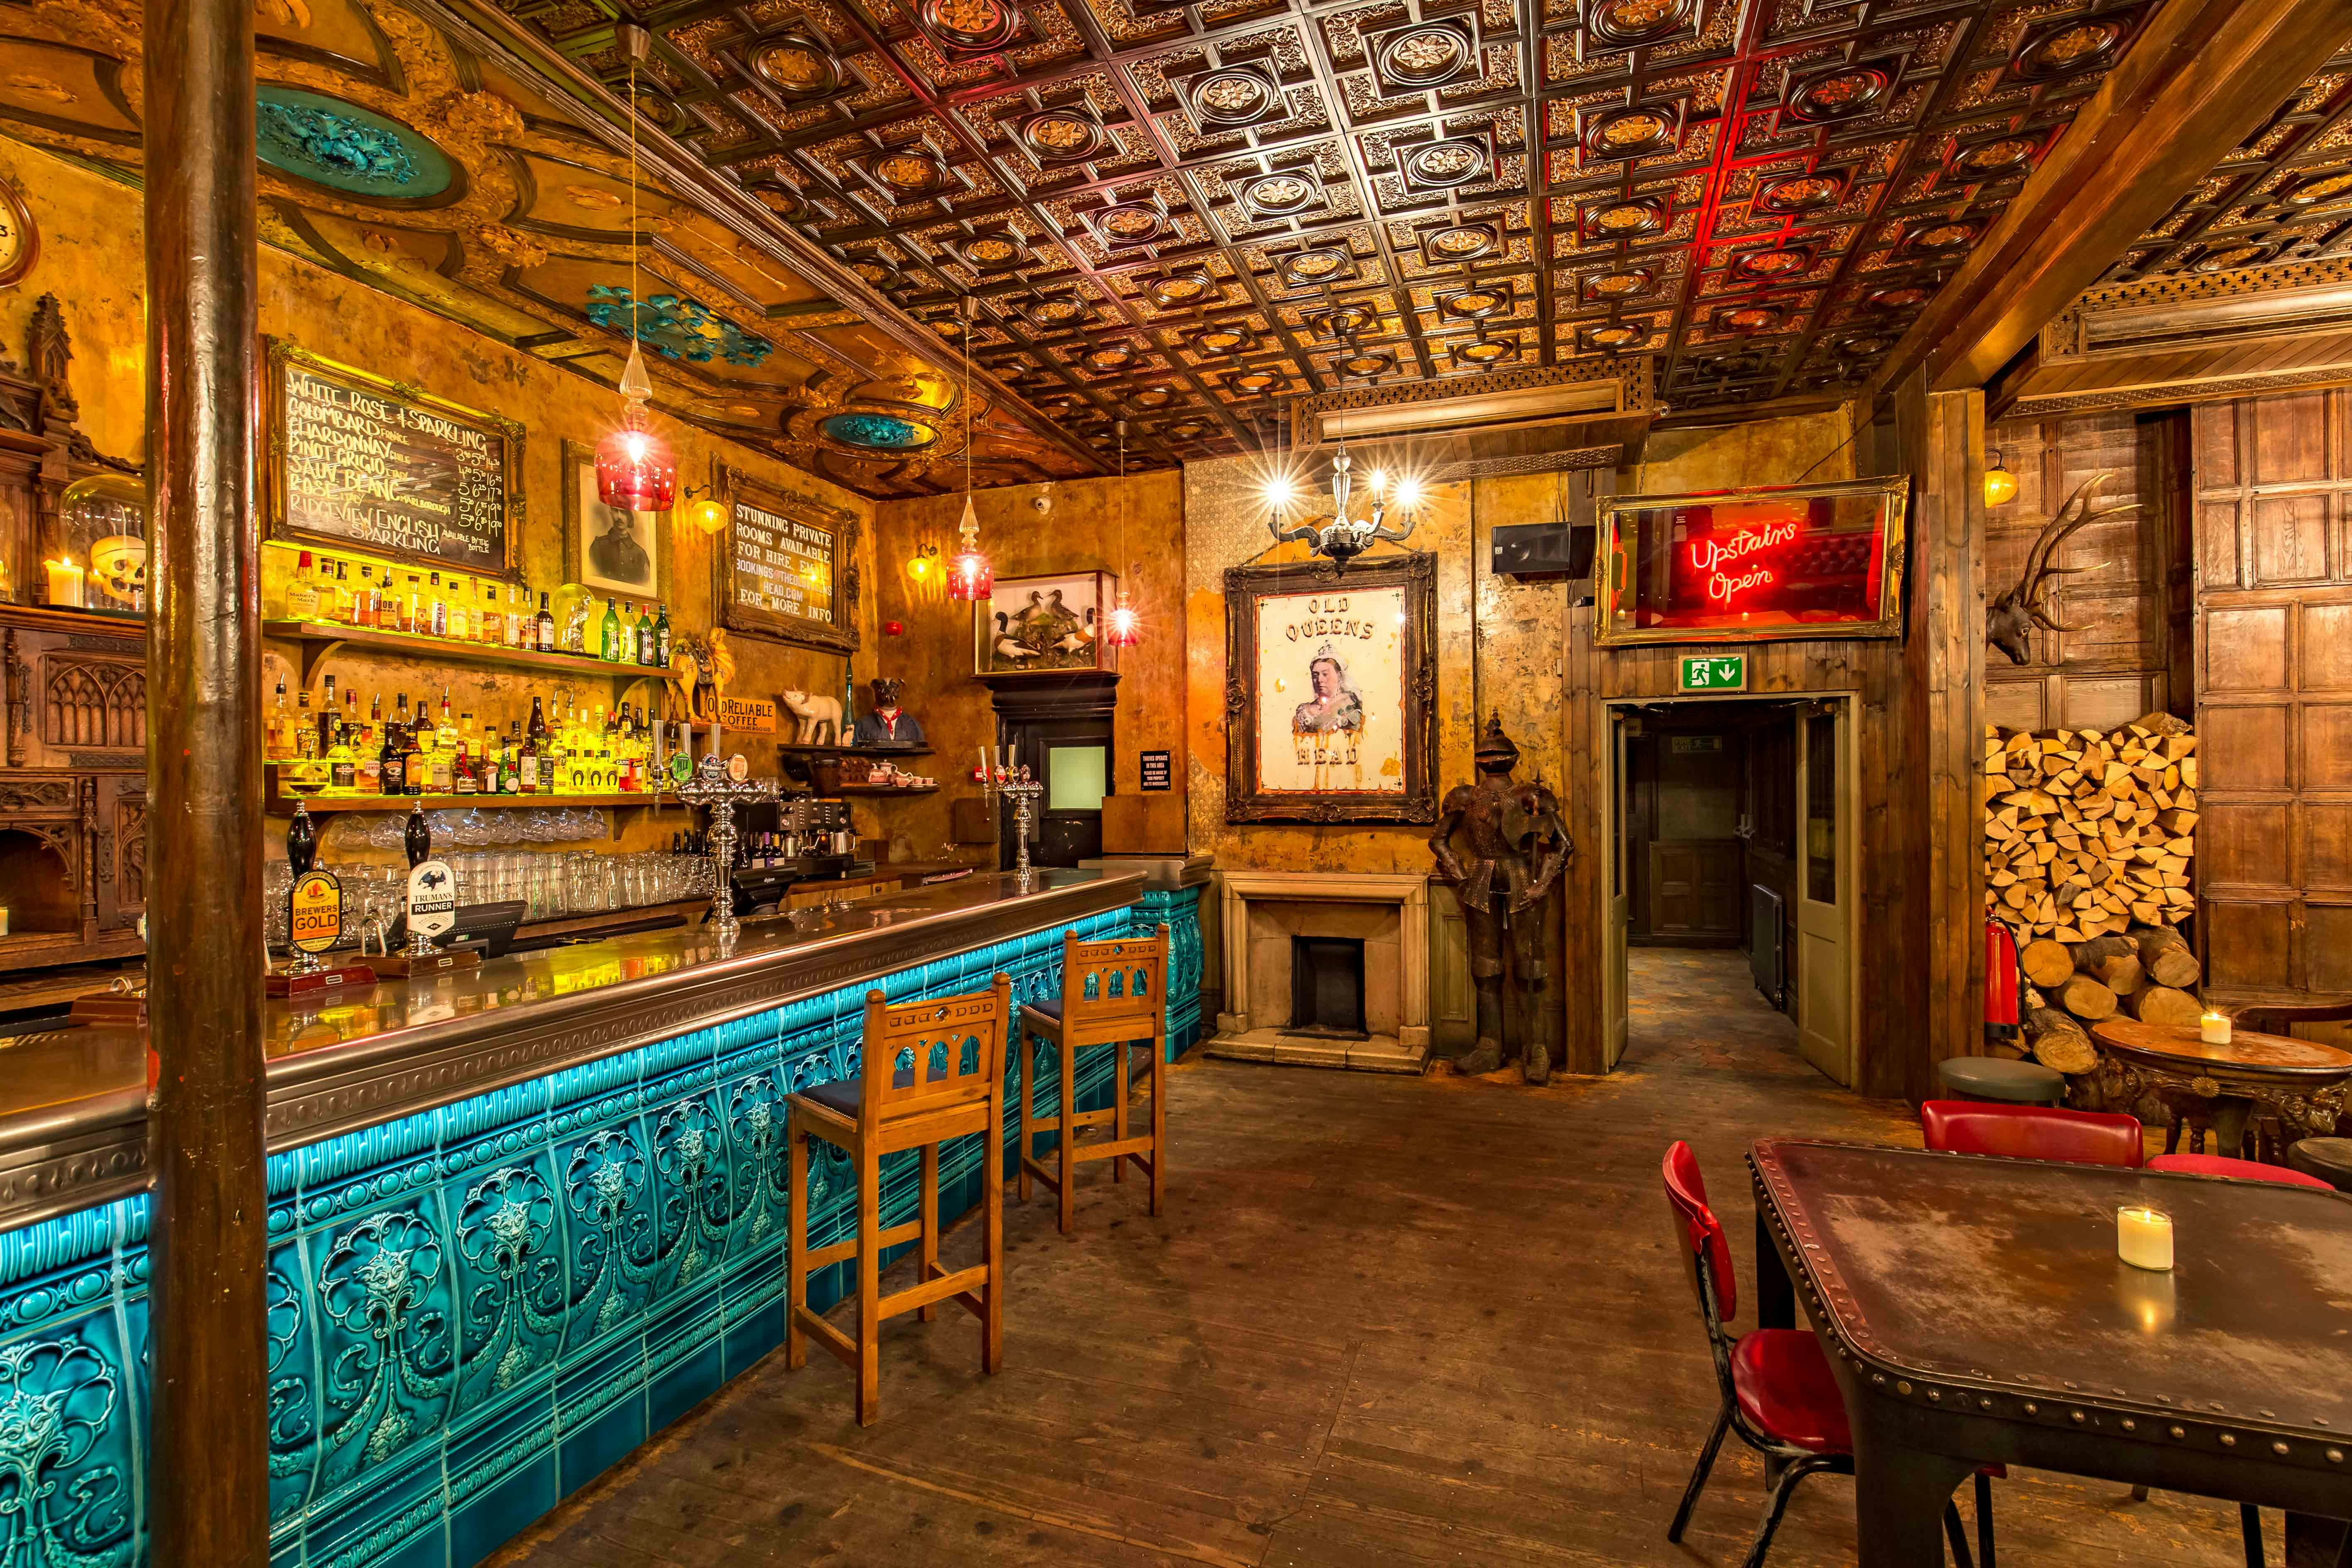 Filming Locations Venues in West London - The Old Queen's Head